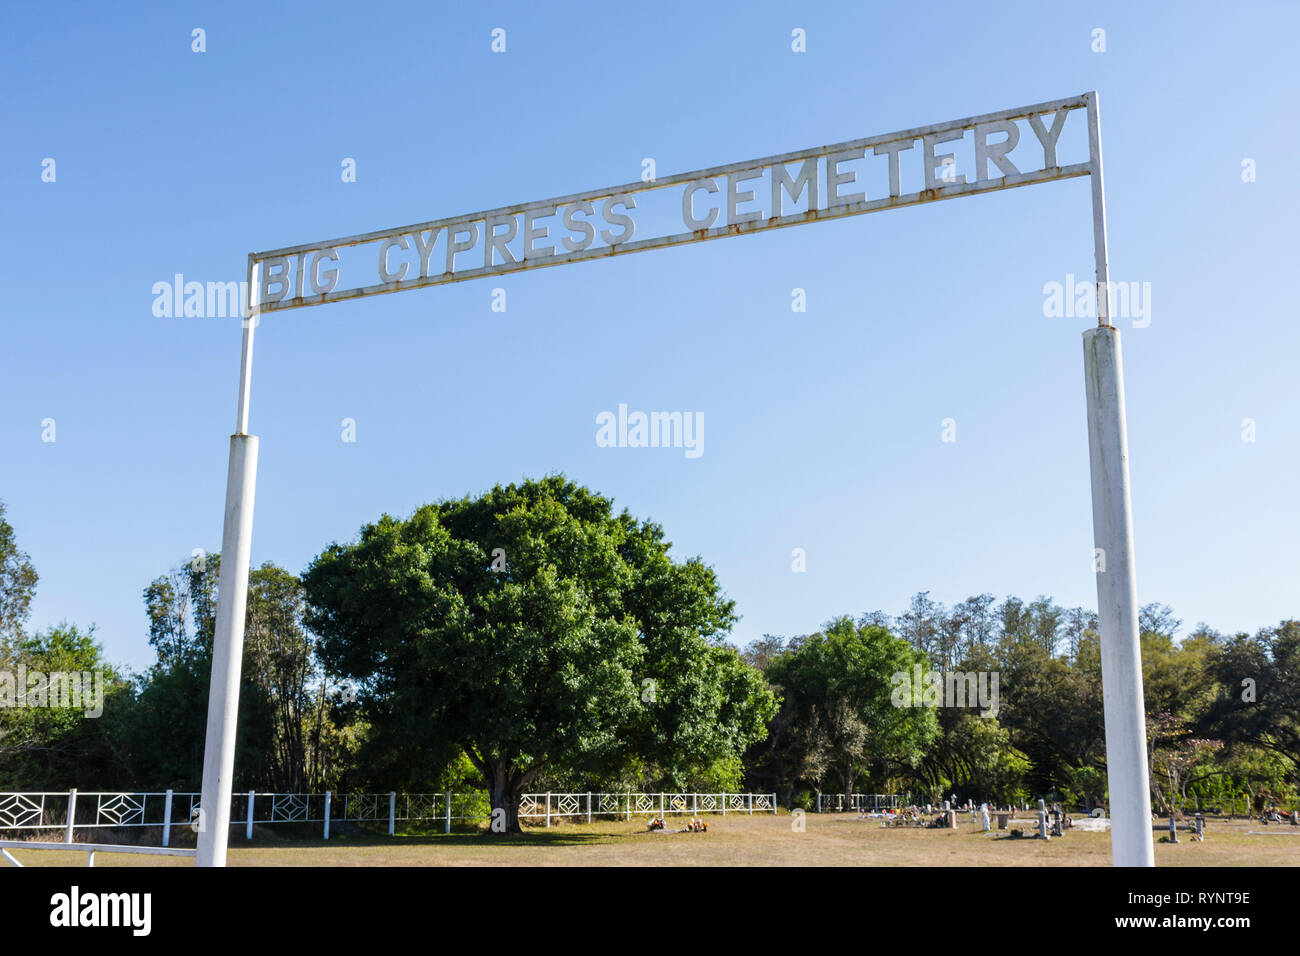 Florida Hendry County,Big Cypress,Seminole Indian Reservation,Native American Indian indigenous peoples,tribe,Big Cypress Cemetery,entrance,front,deat Stock Photo